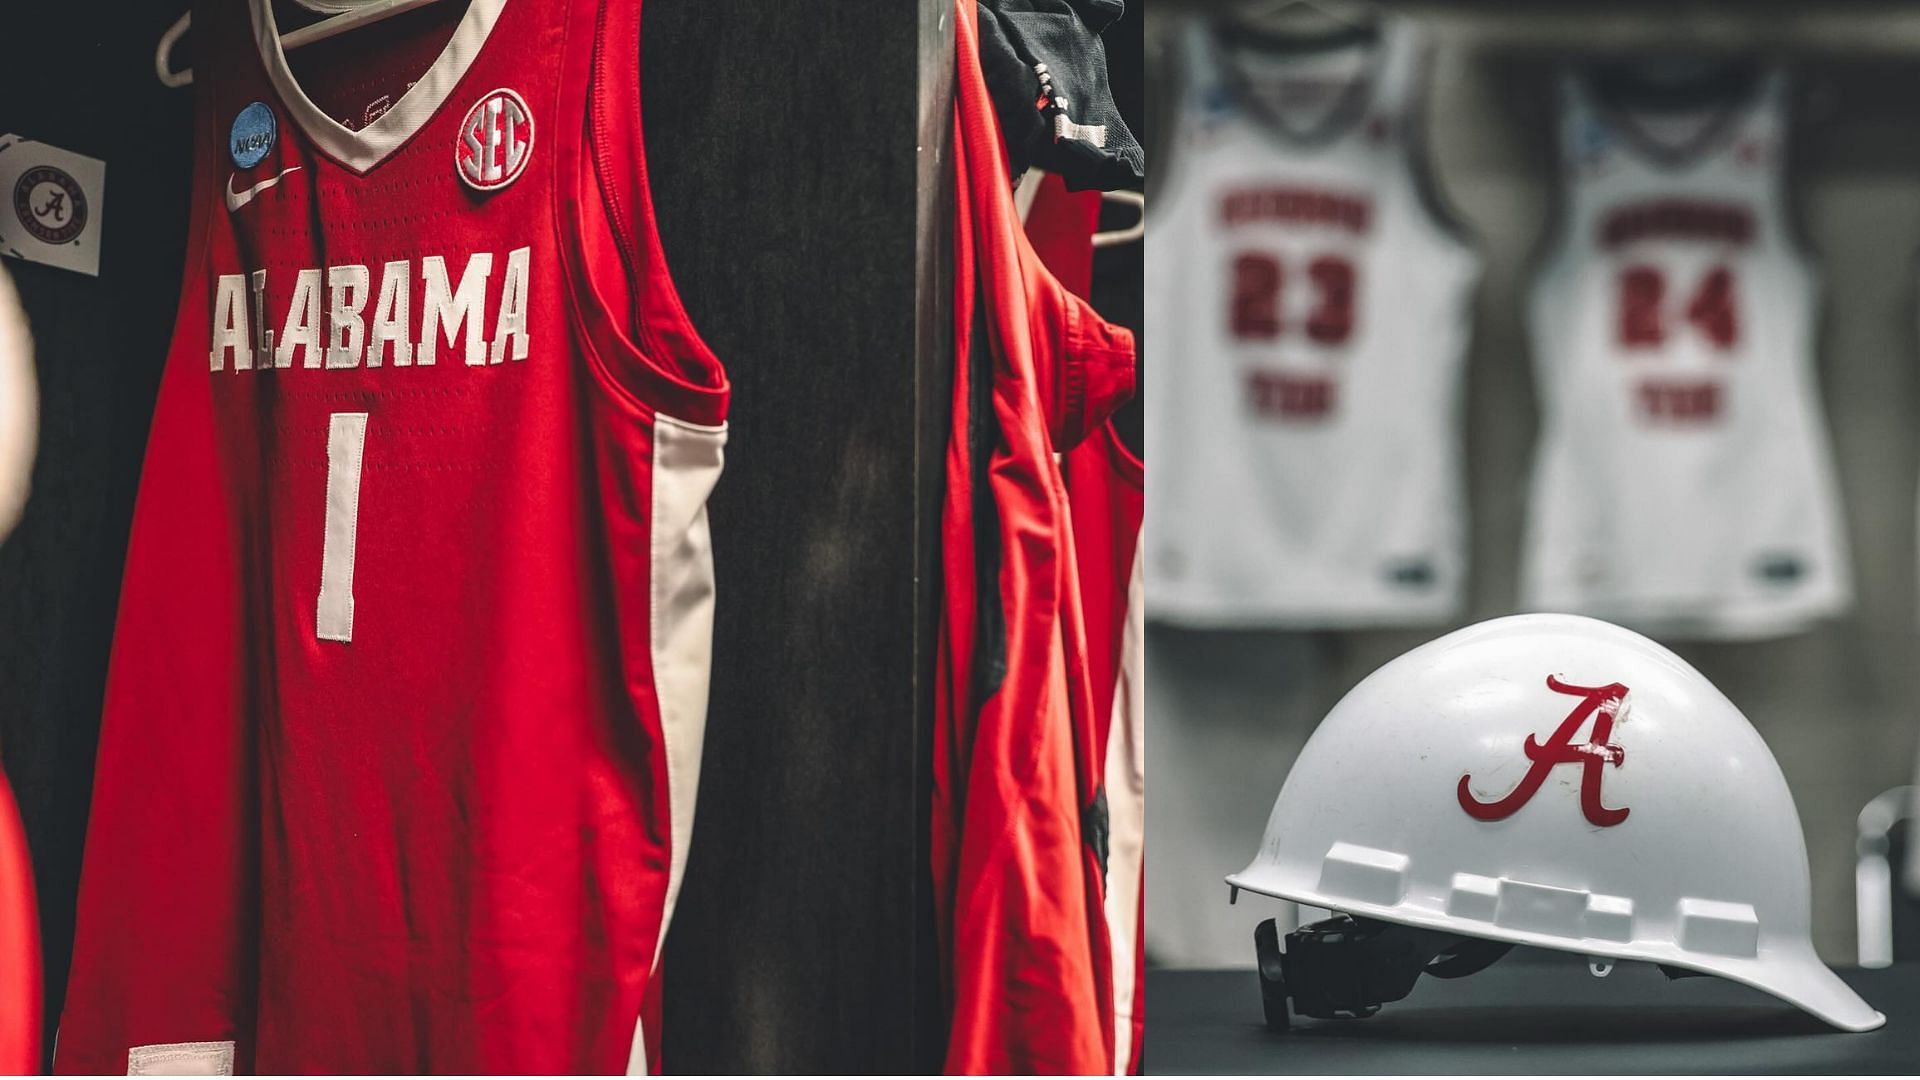 New digits for Alabama basketball Jerseys have been released